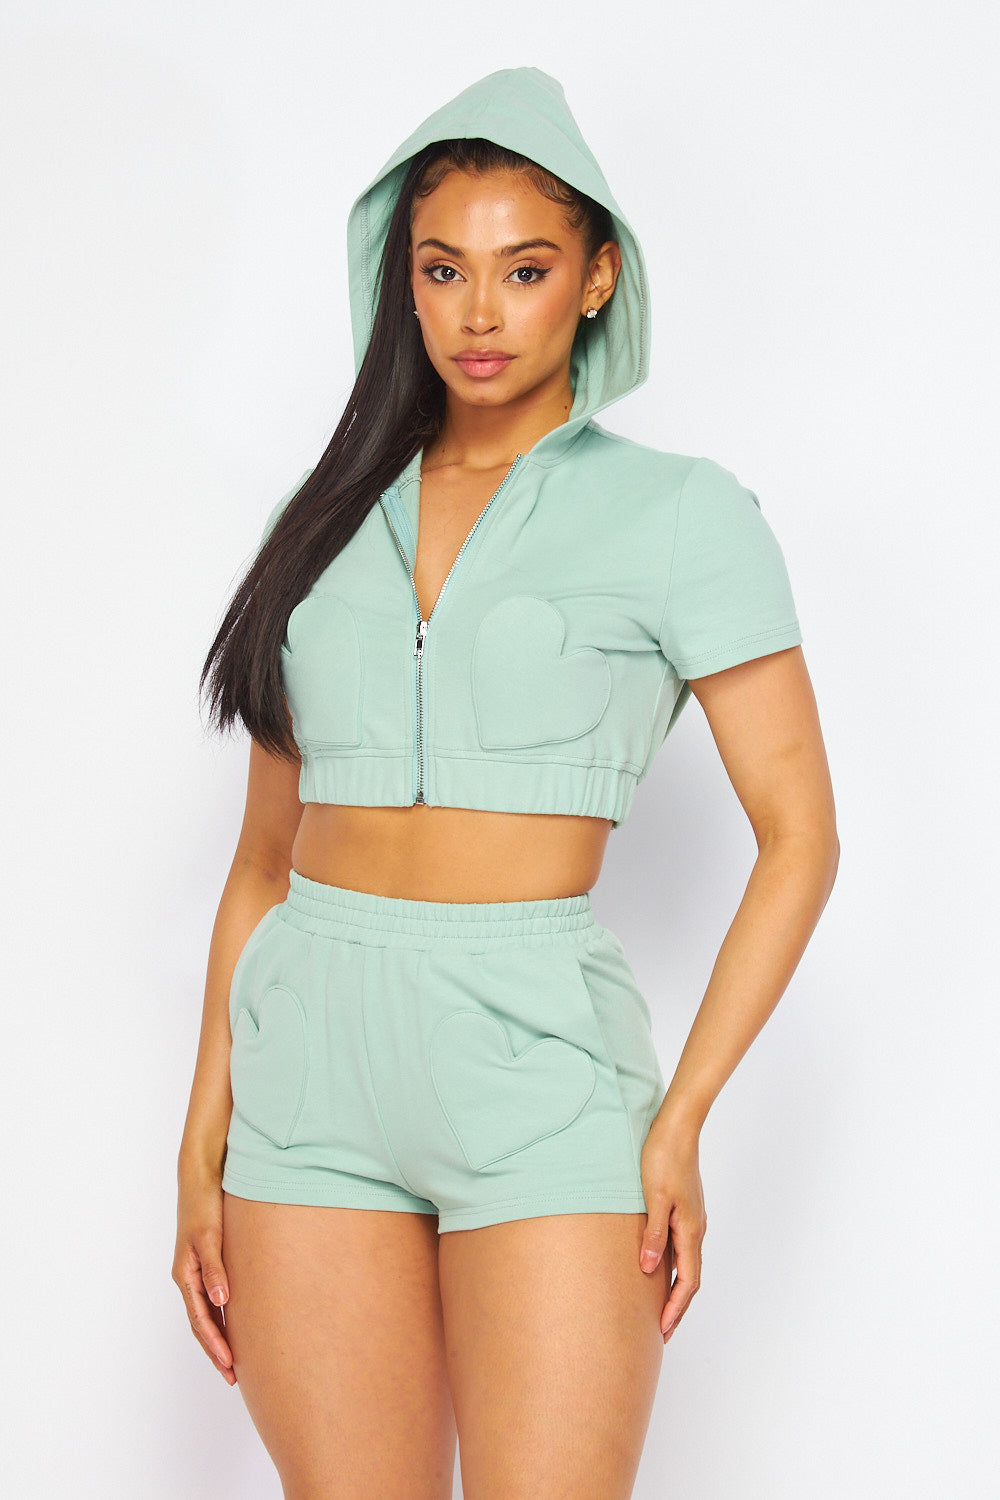 The Truth Heart Pocket Zip Up Top and Short Set